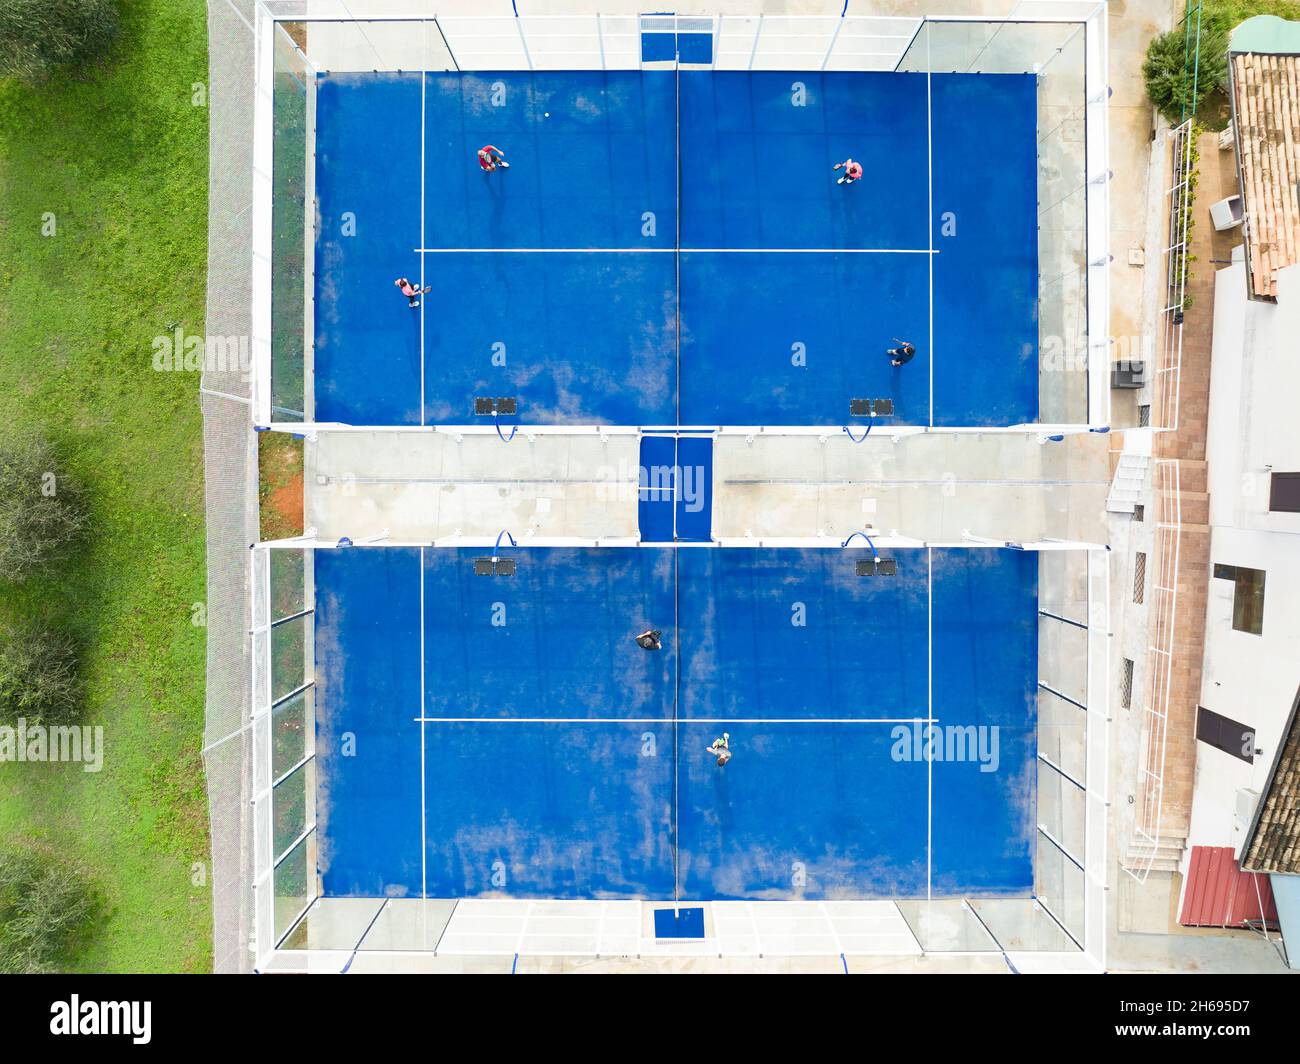 View from above, stunning aerial view of some people playing on a blue padel court. Padel is a mix between Tennis and Squash. Stock Photo